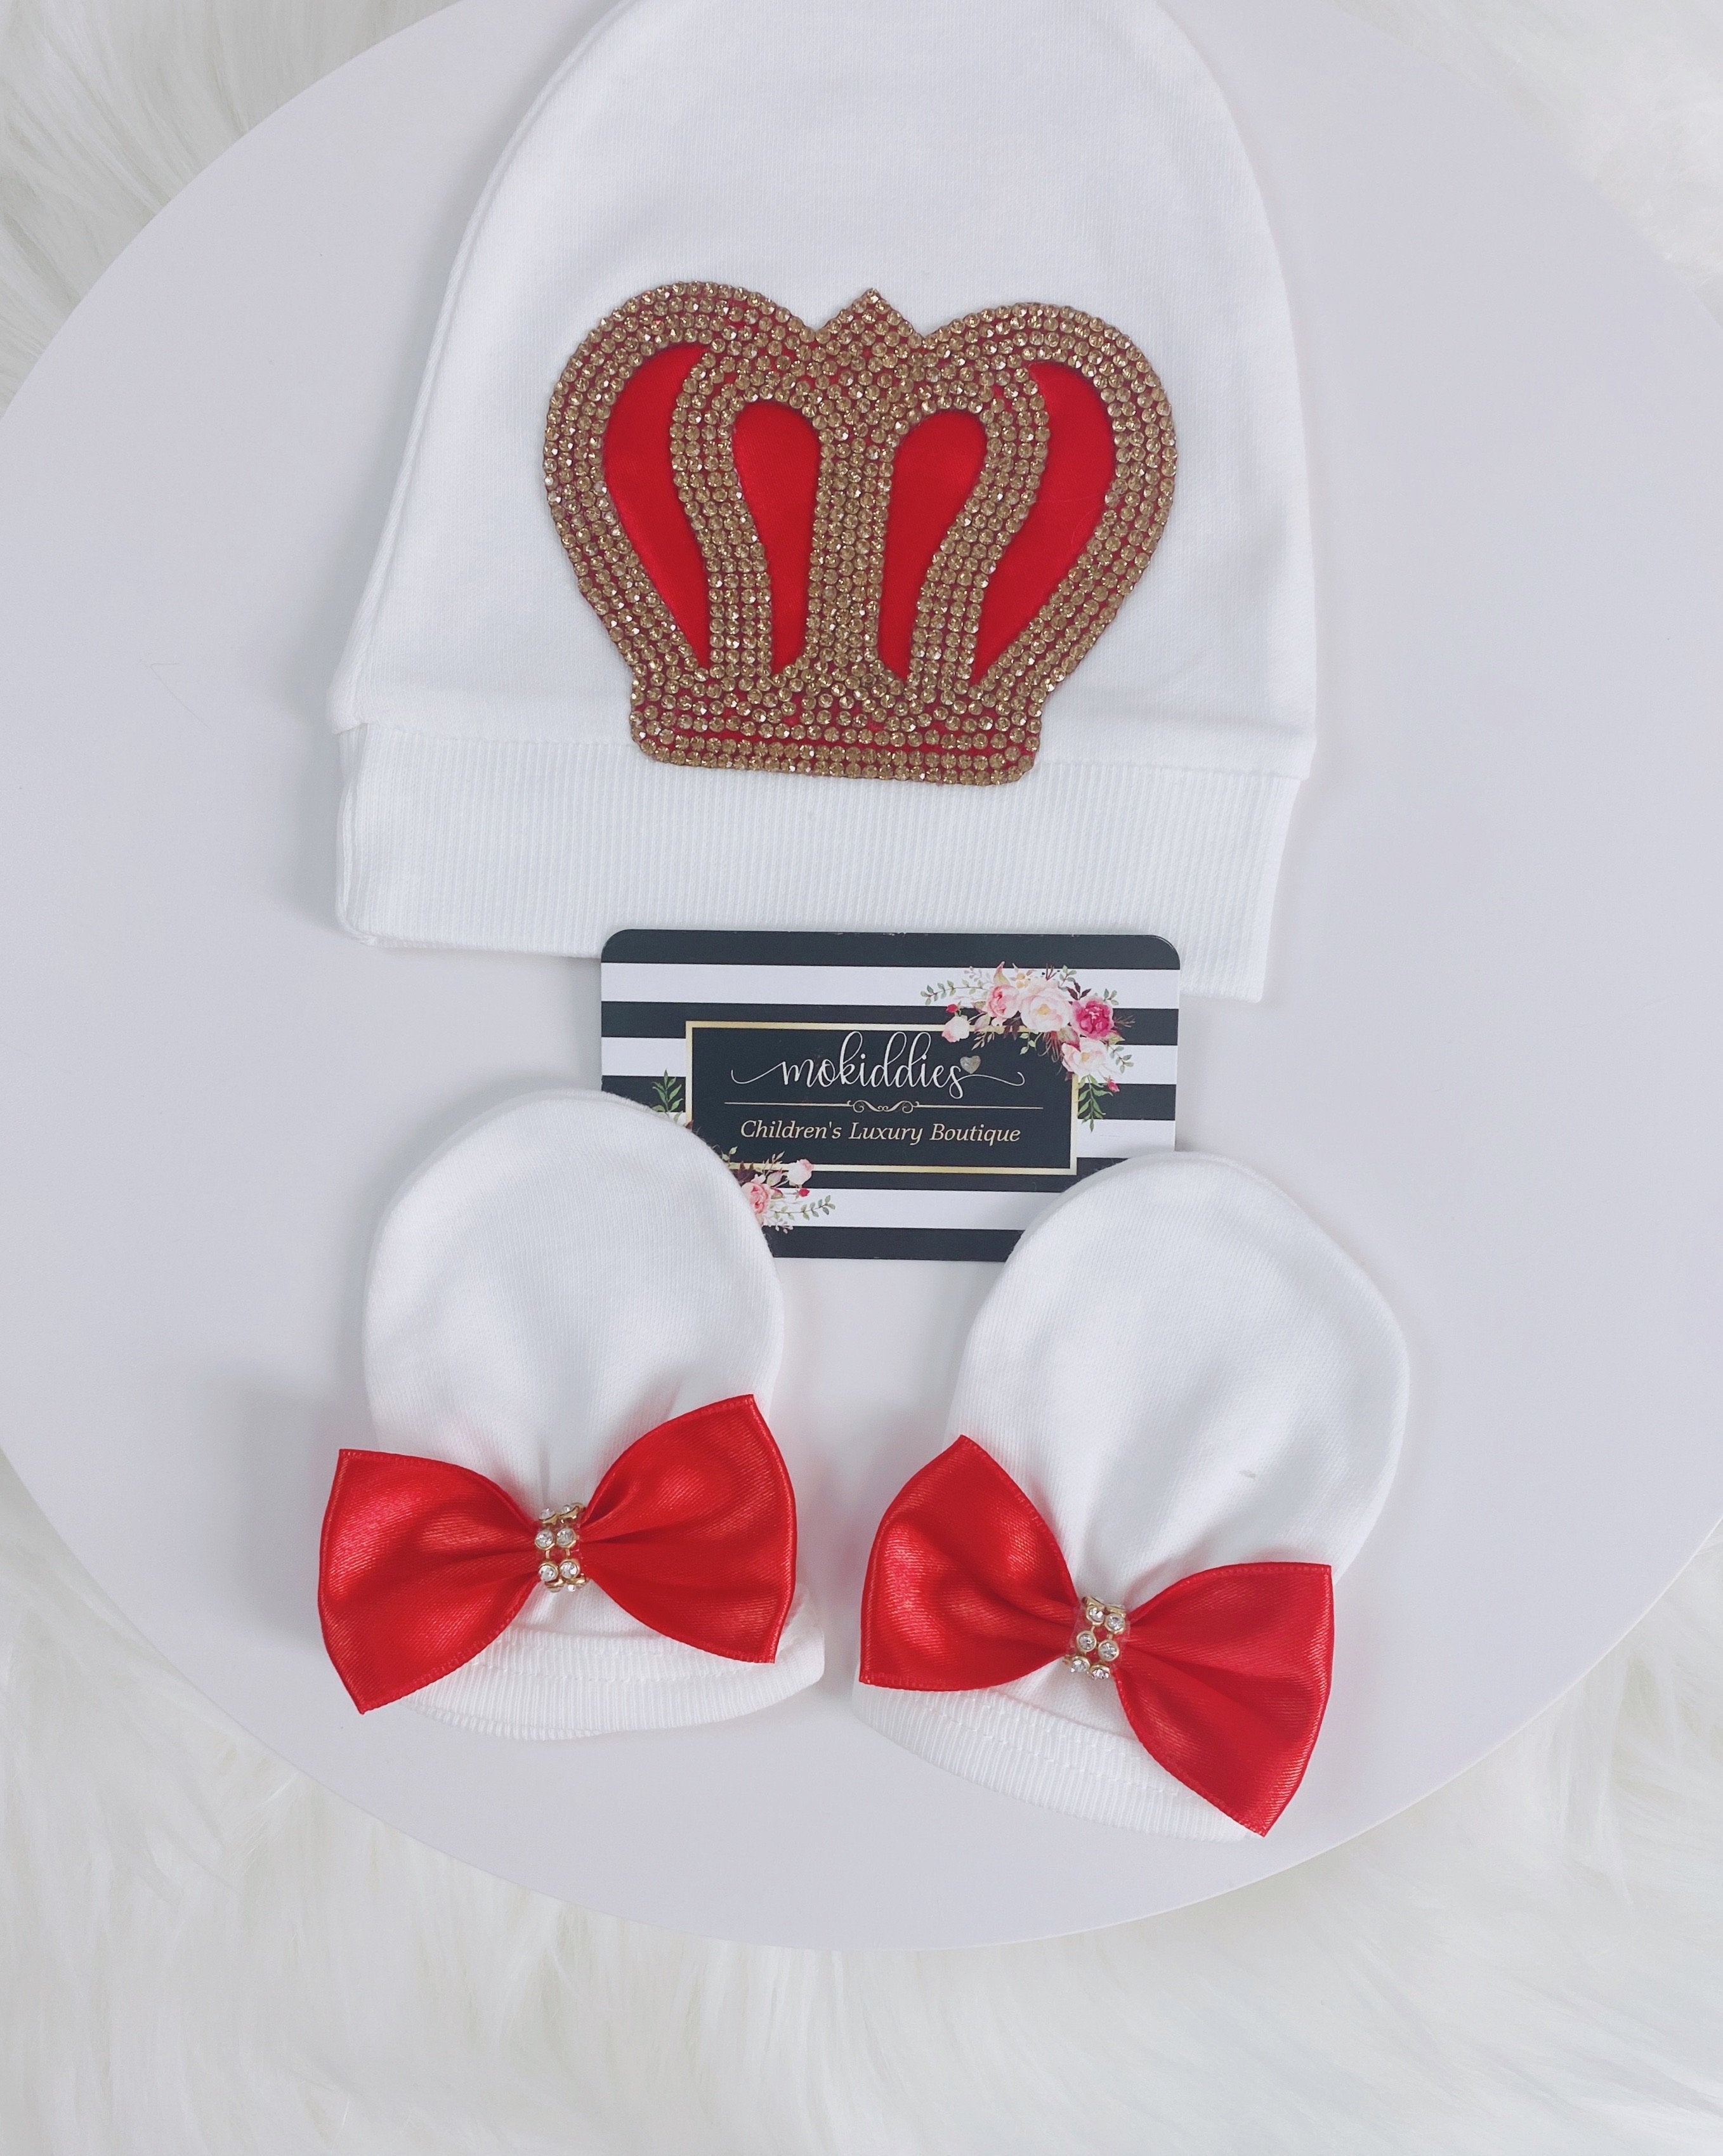 10 PIECE CUSTOMIZED CROWN SET (Red)